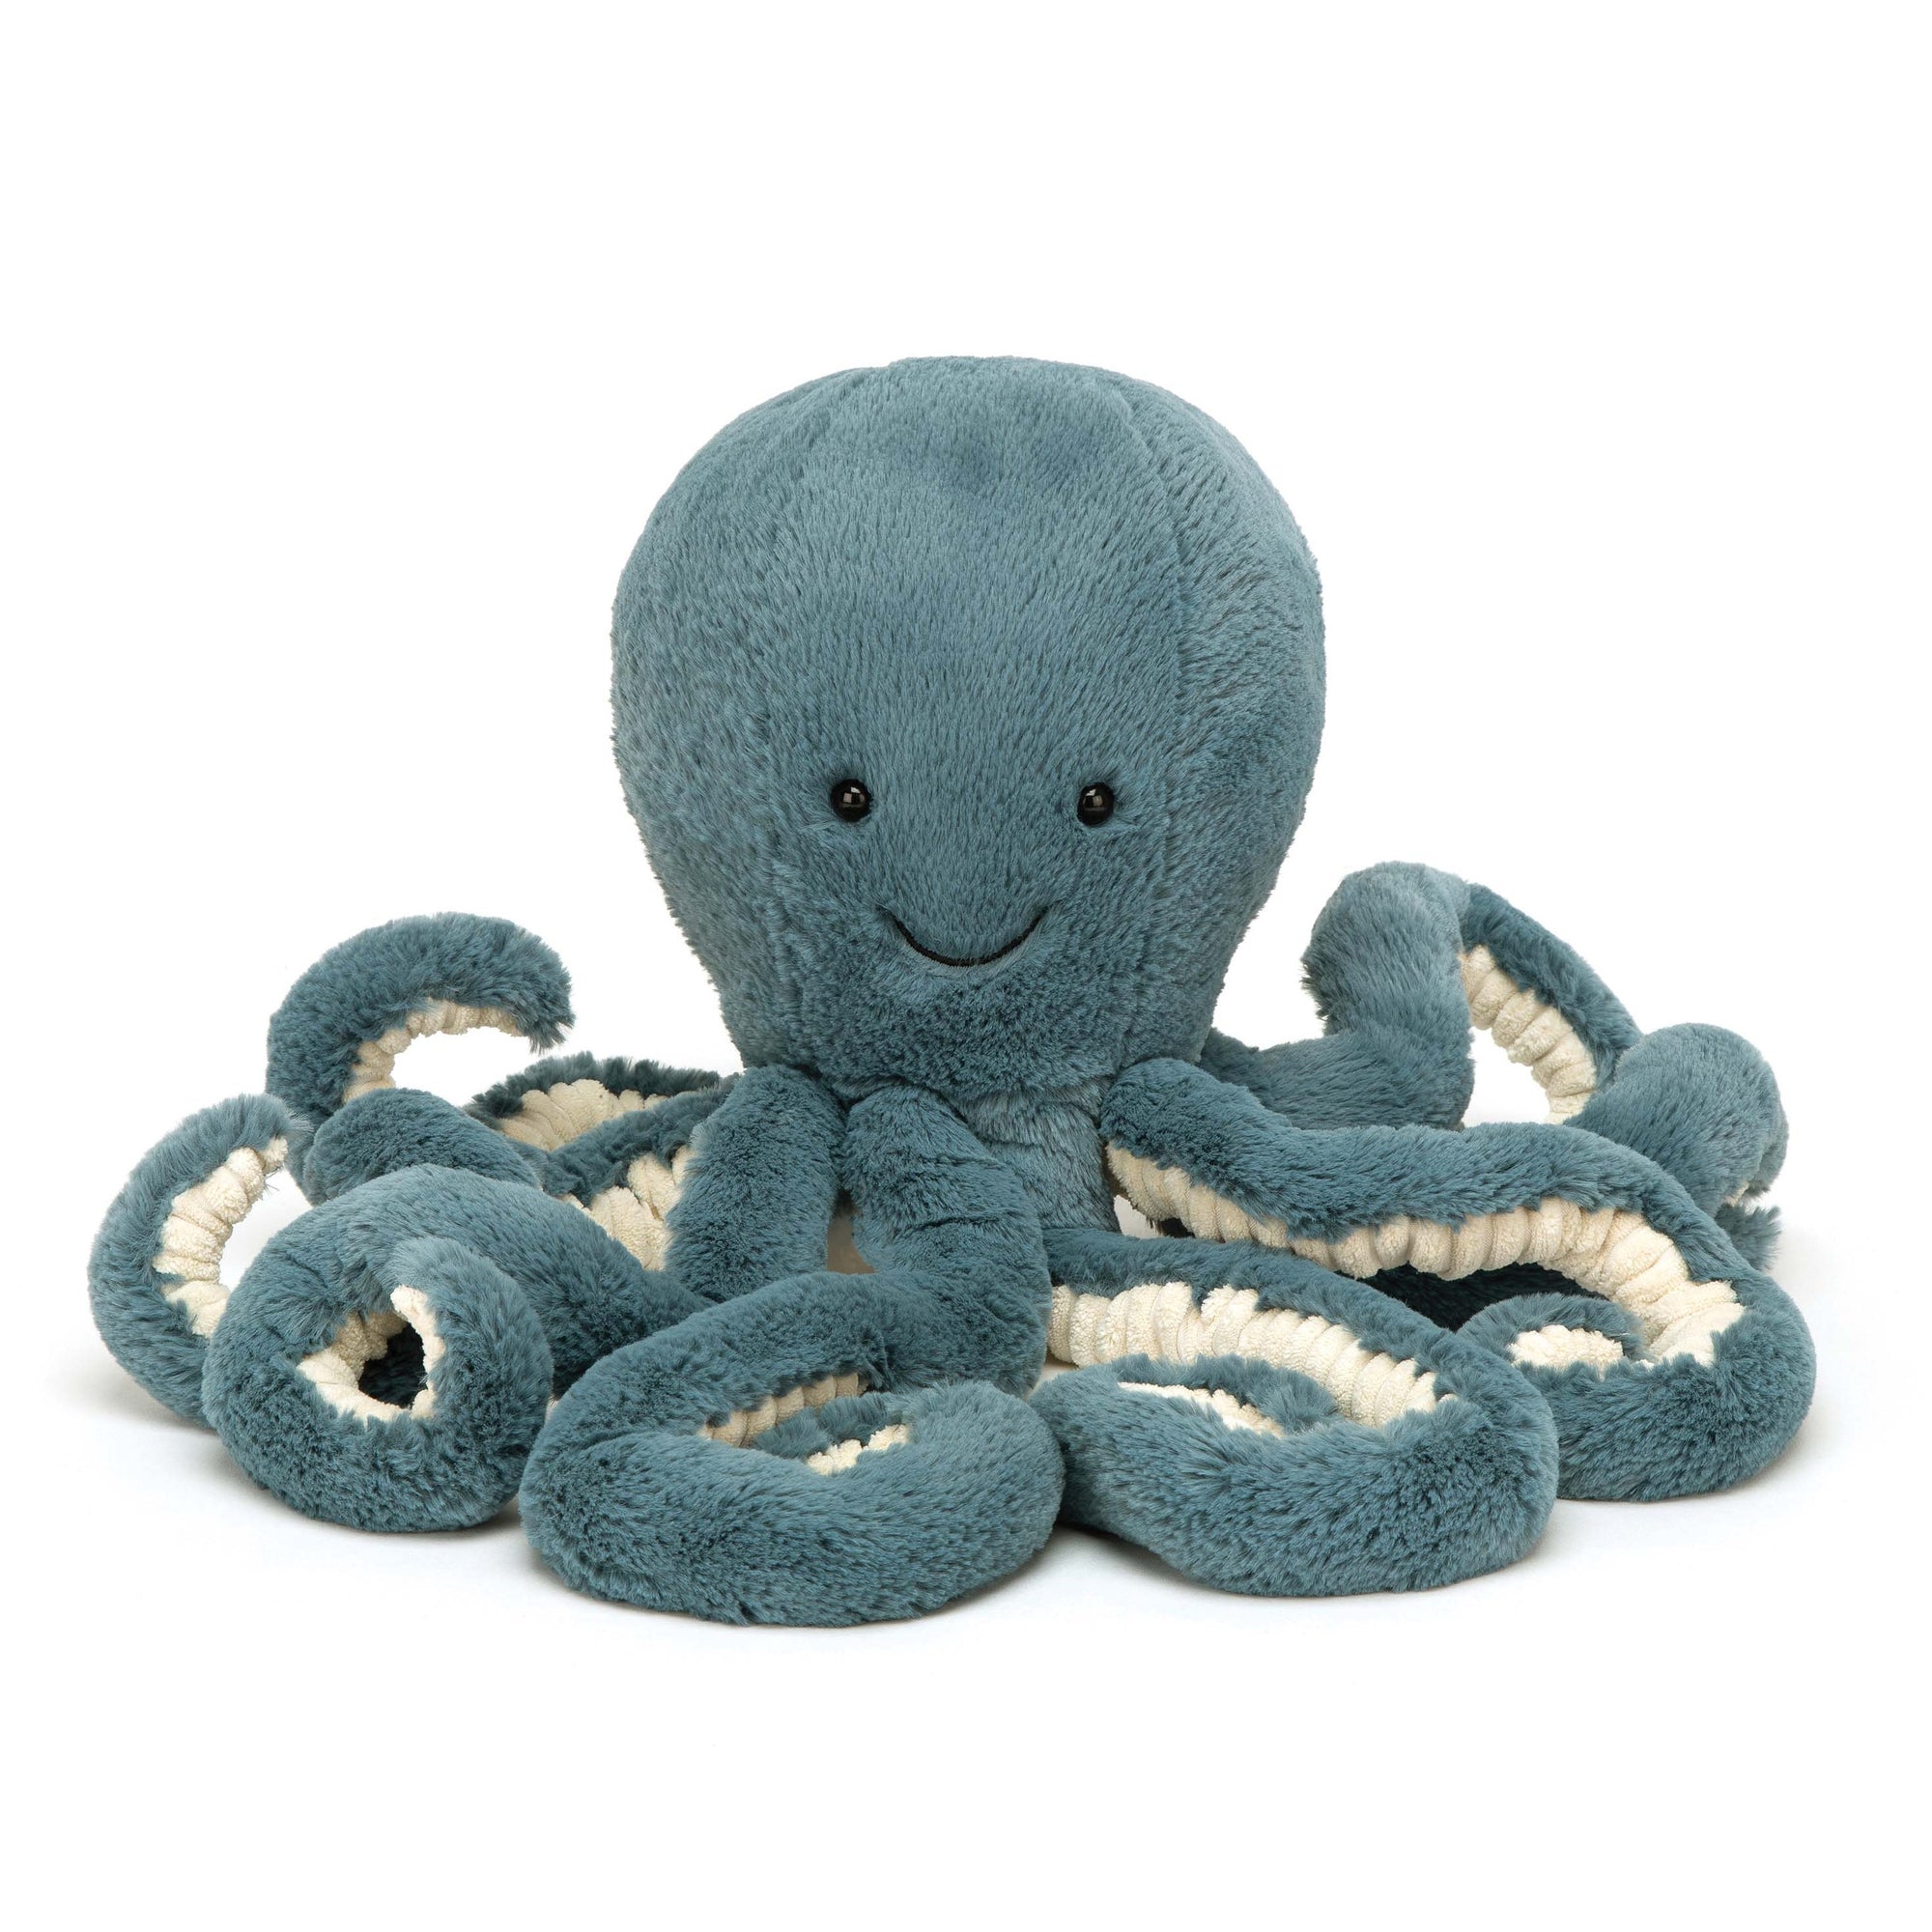 jellycat octopus - angus and dudley